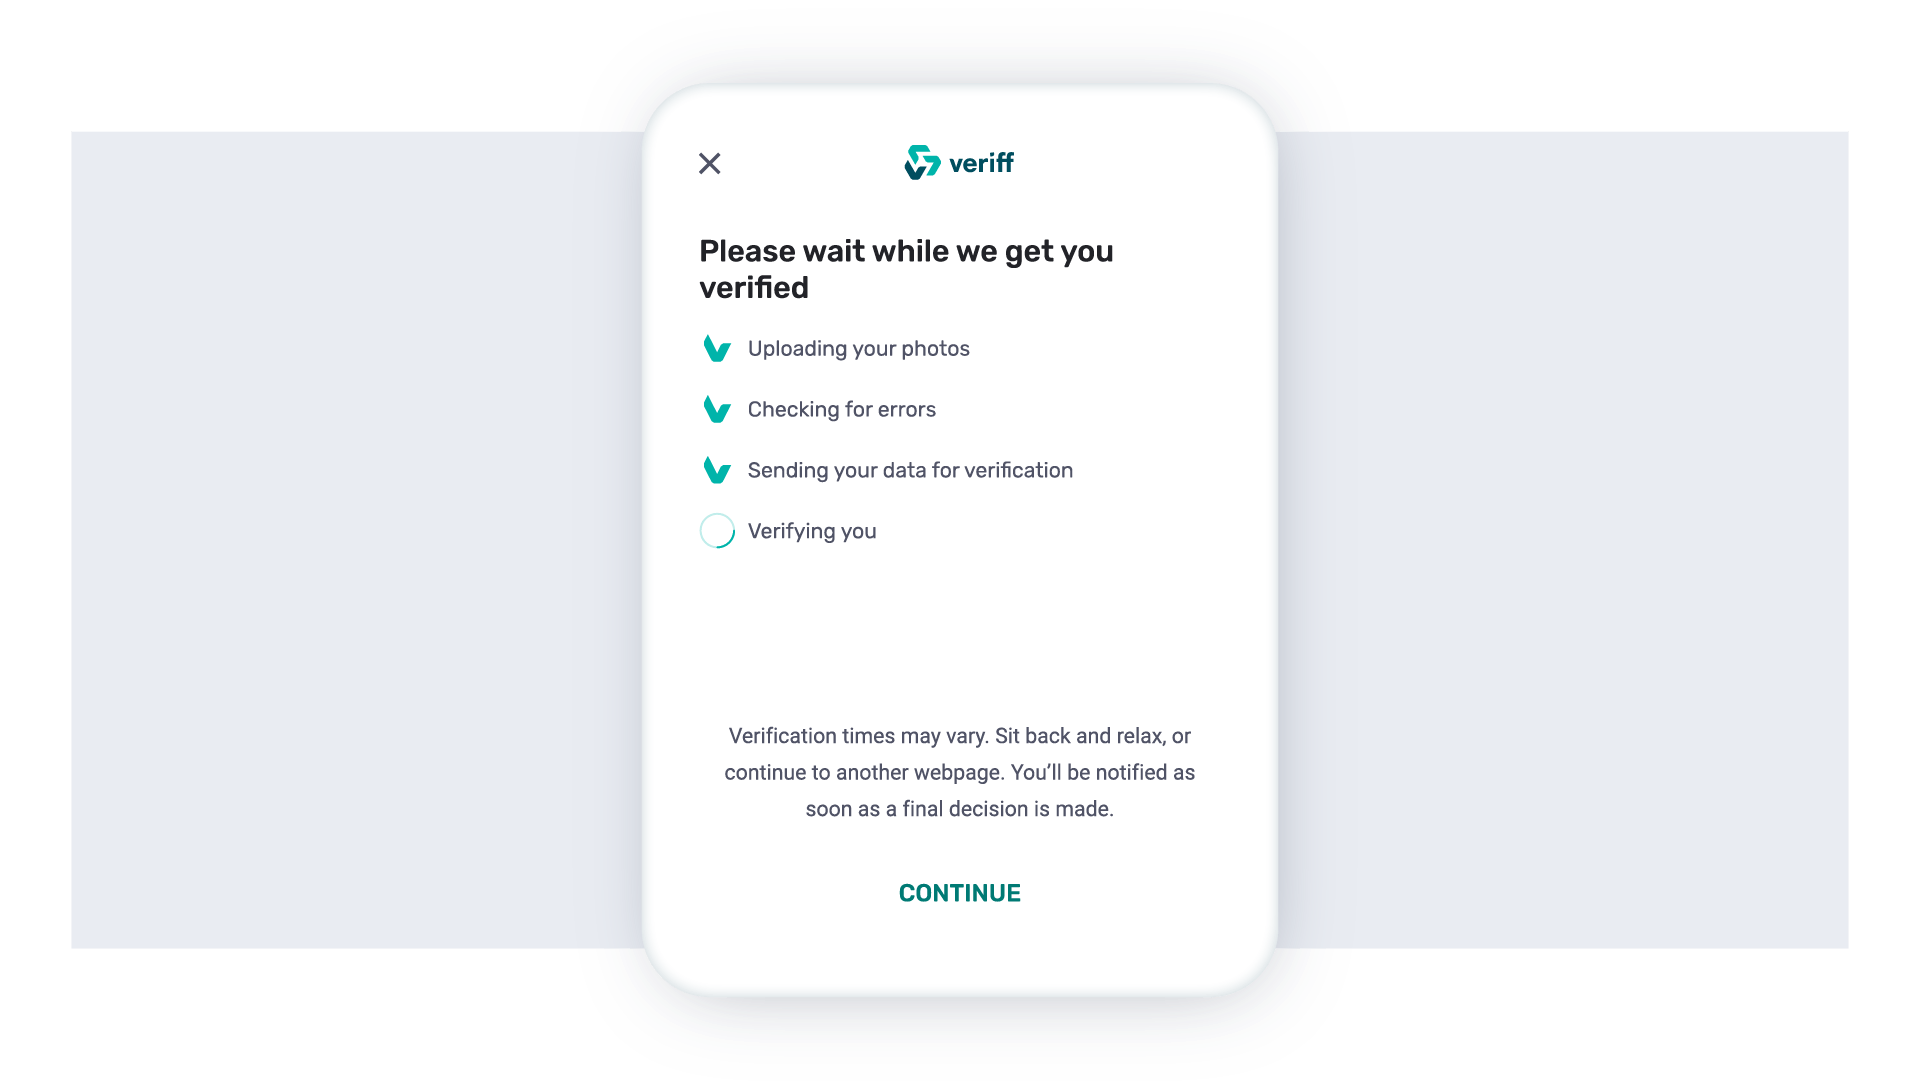 Veriff's 'Leave User Waiting' Feature